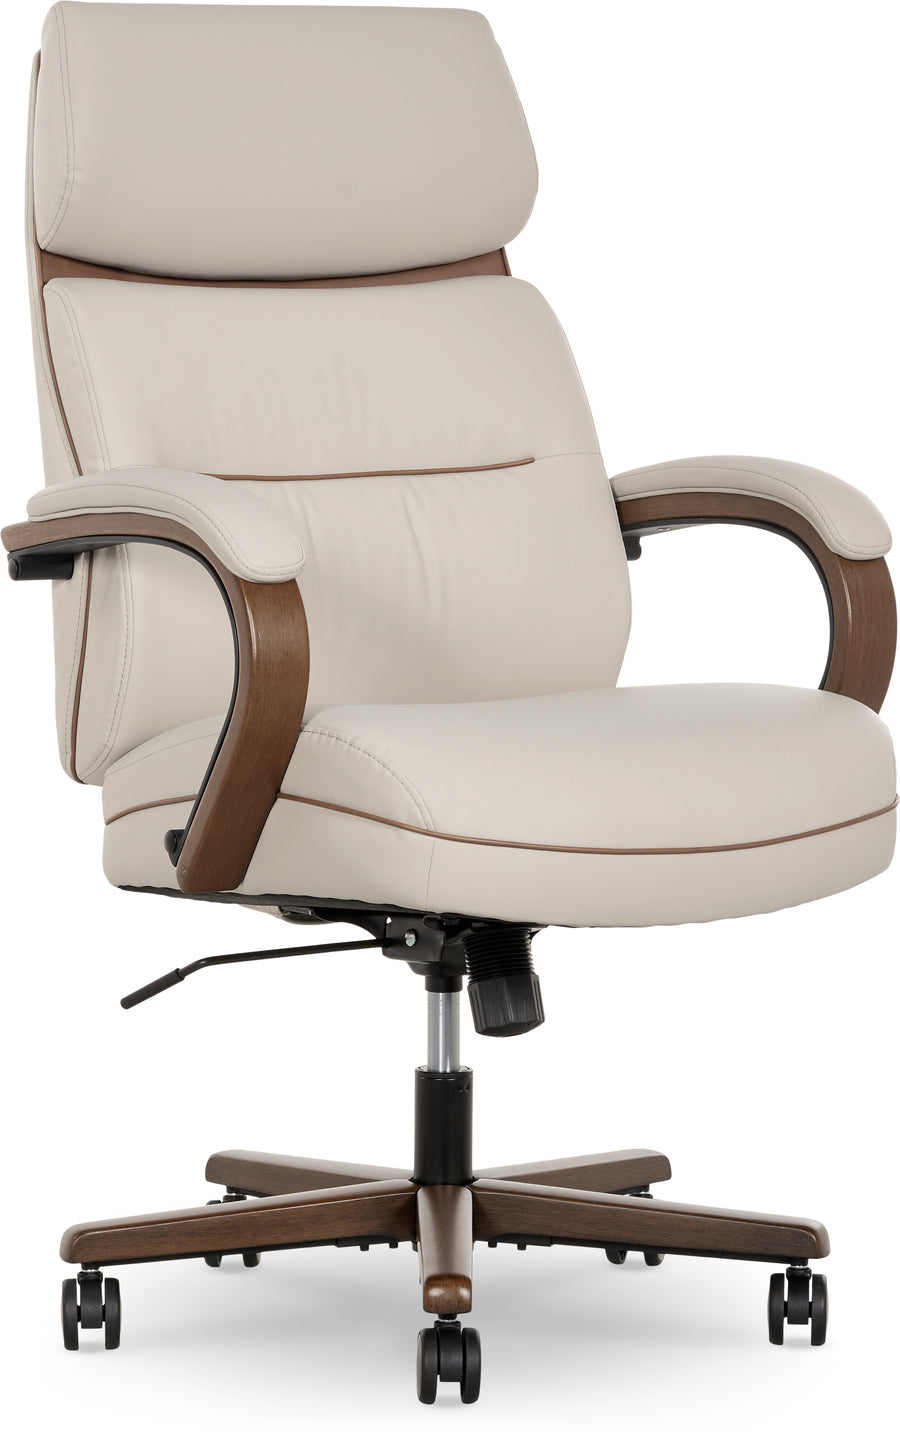 Finch Neo Two Retro-Modern Mid-Back Office Chair - Cream_0